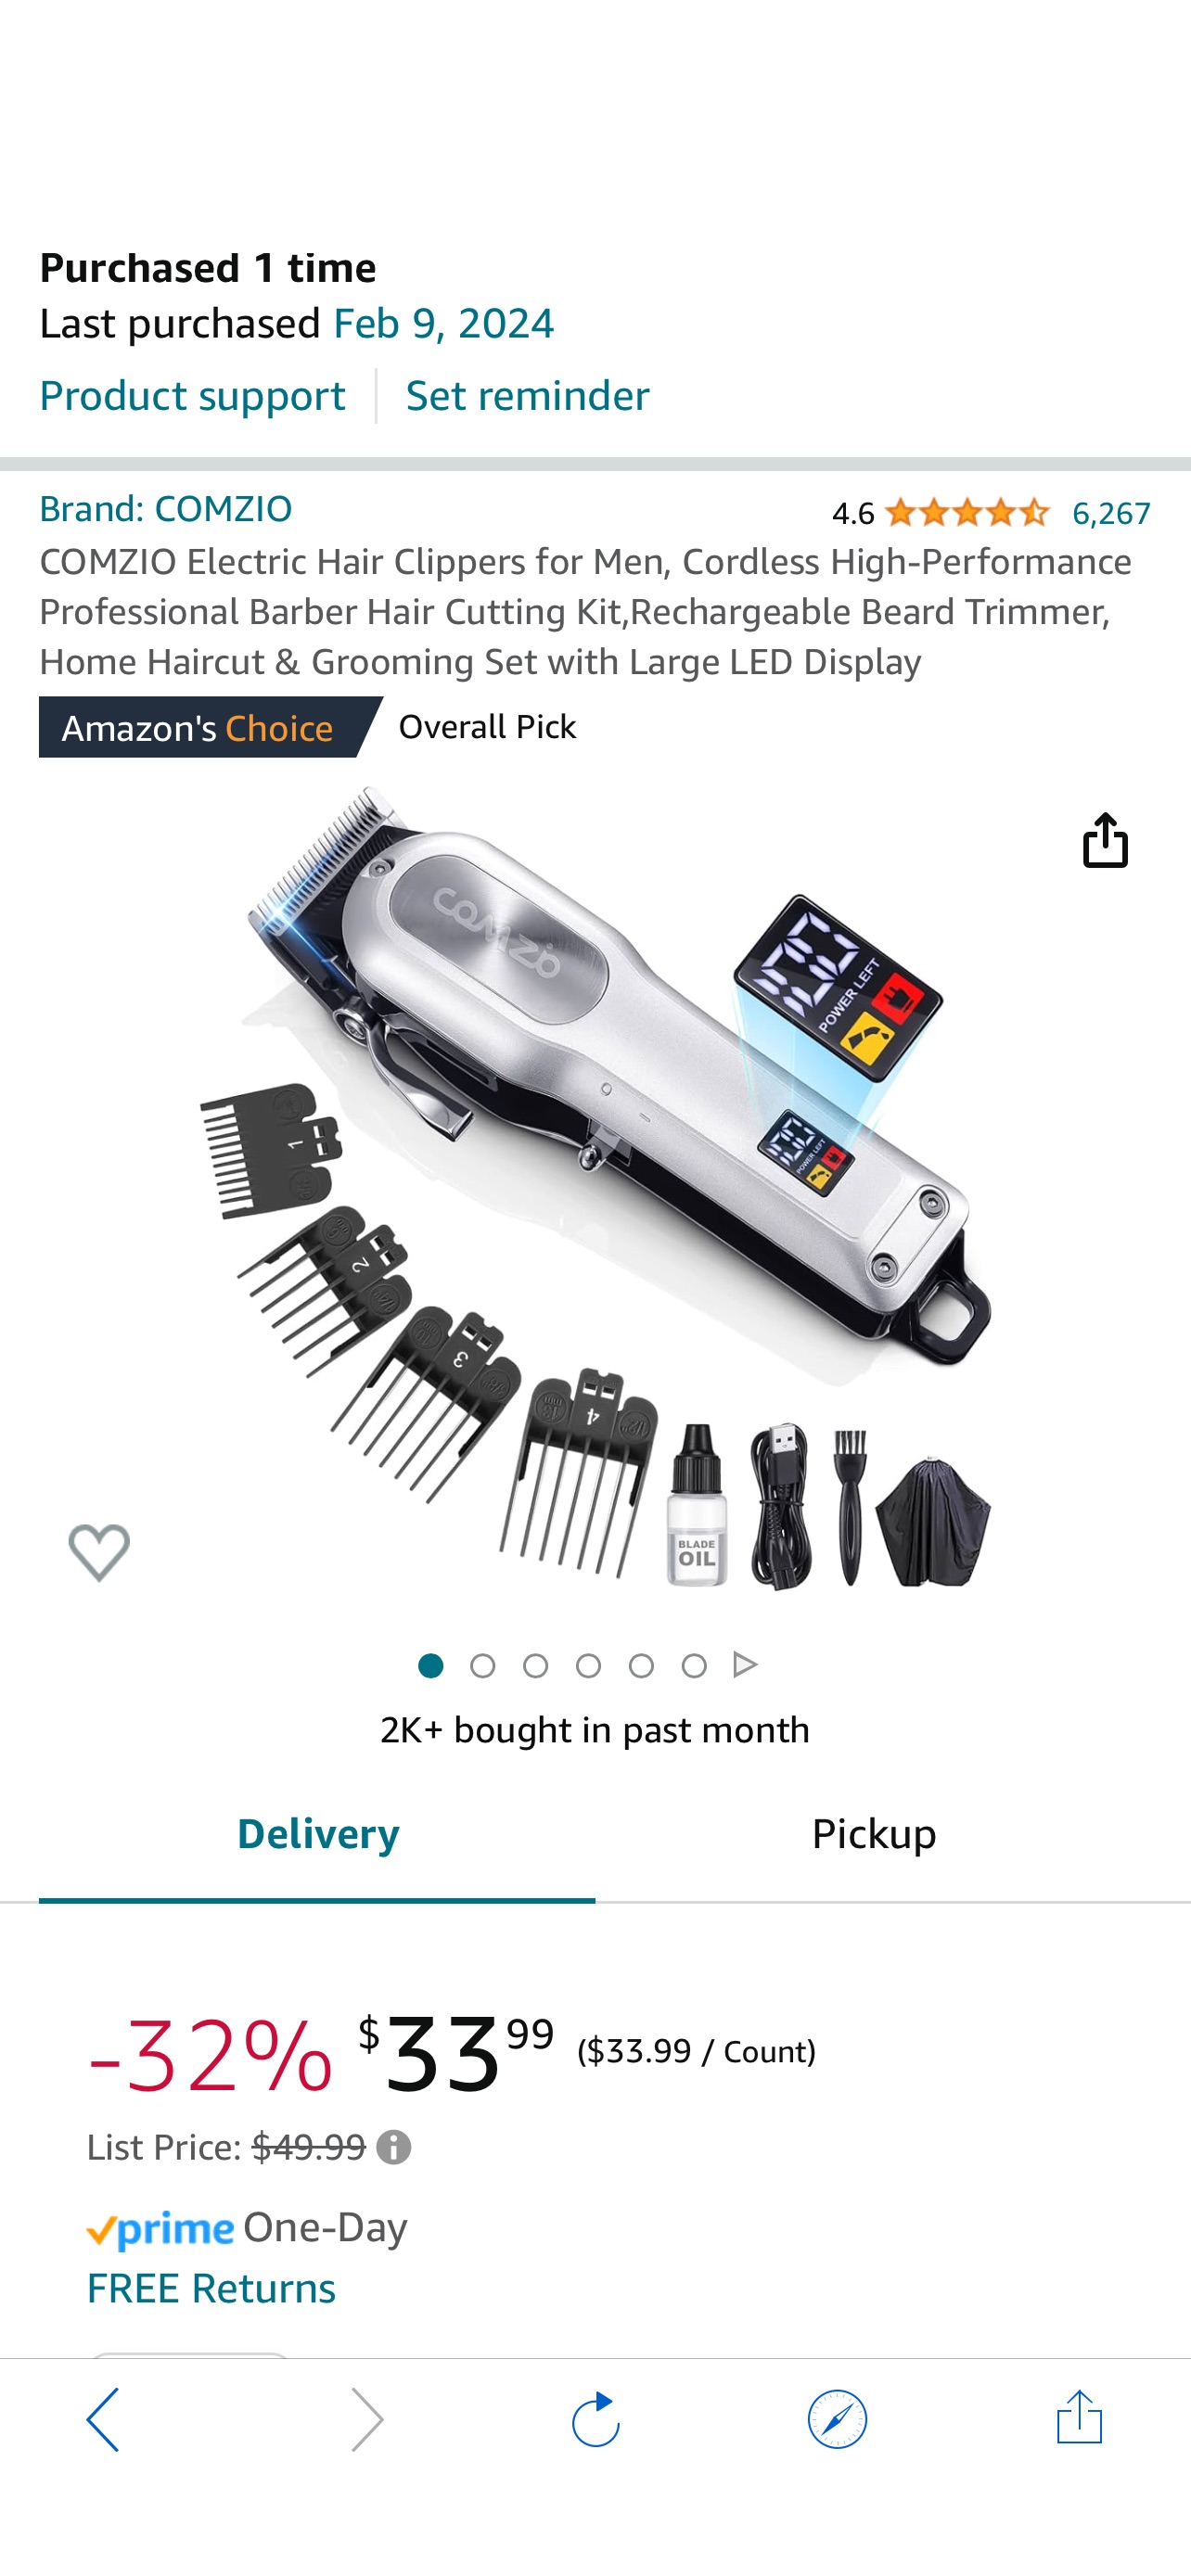 Amazon.com: COMZIO Electric Hair Clippers for Men, Cordless High-Performance Professional Barber Hair Cutting Kit,Rechargeable Beard Trimmer, Home Haircut & Grooming Set with Large LED Display : Beaut